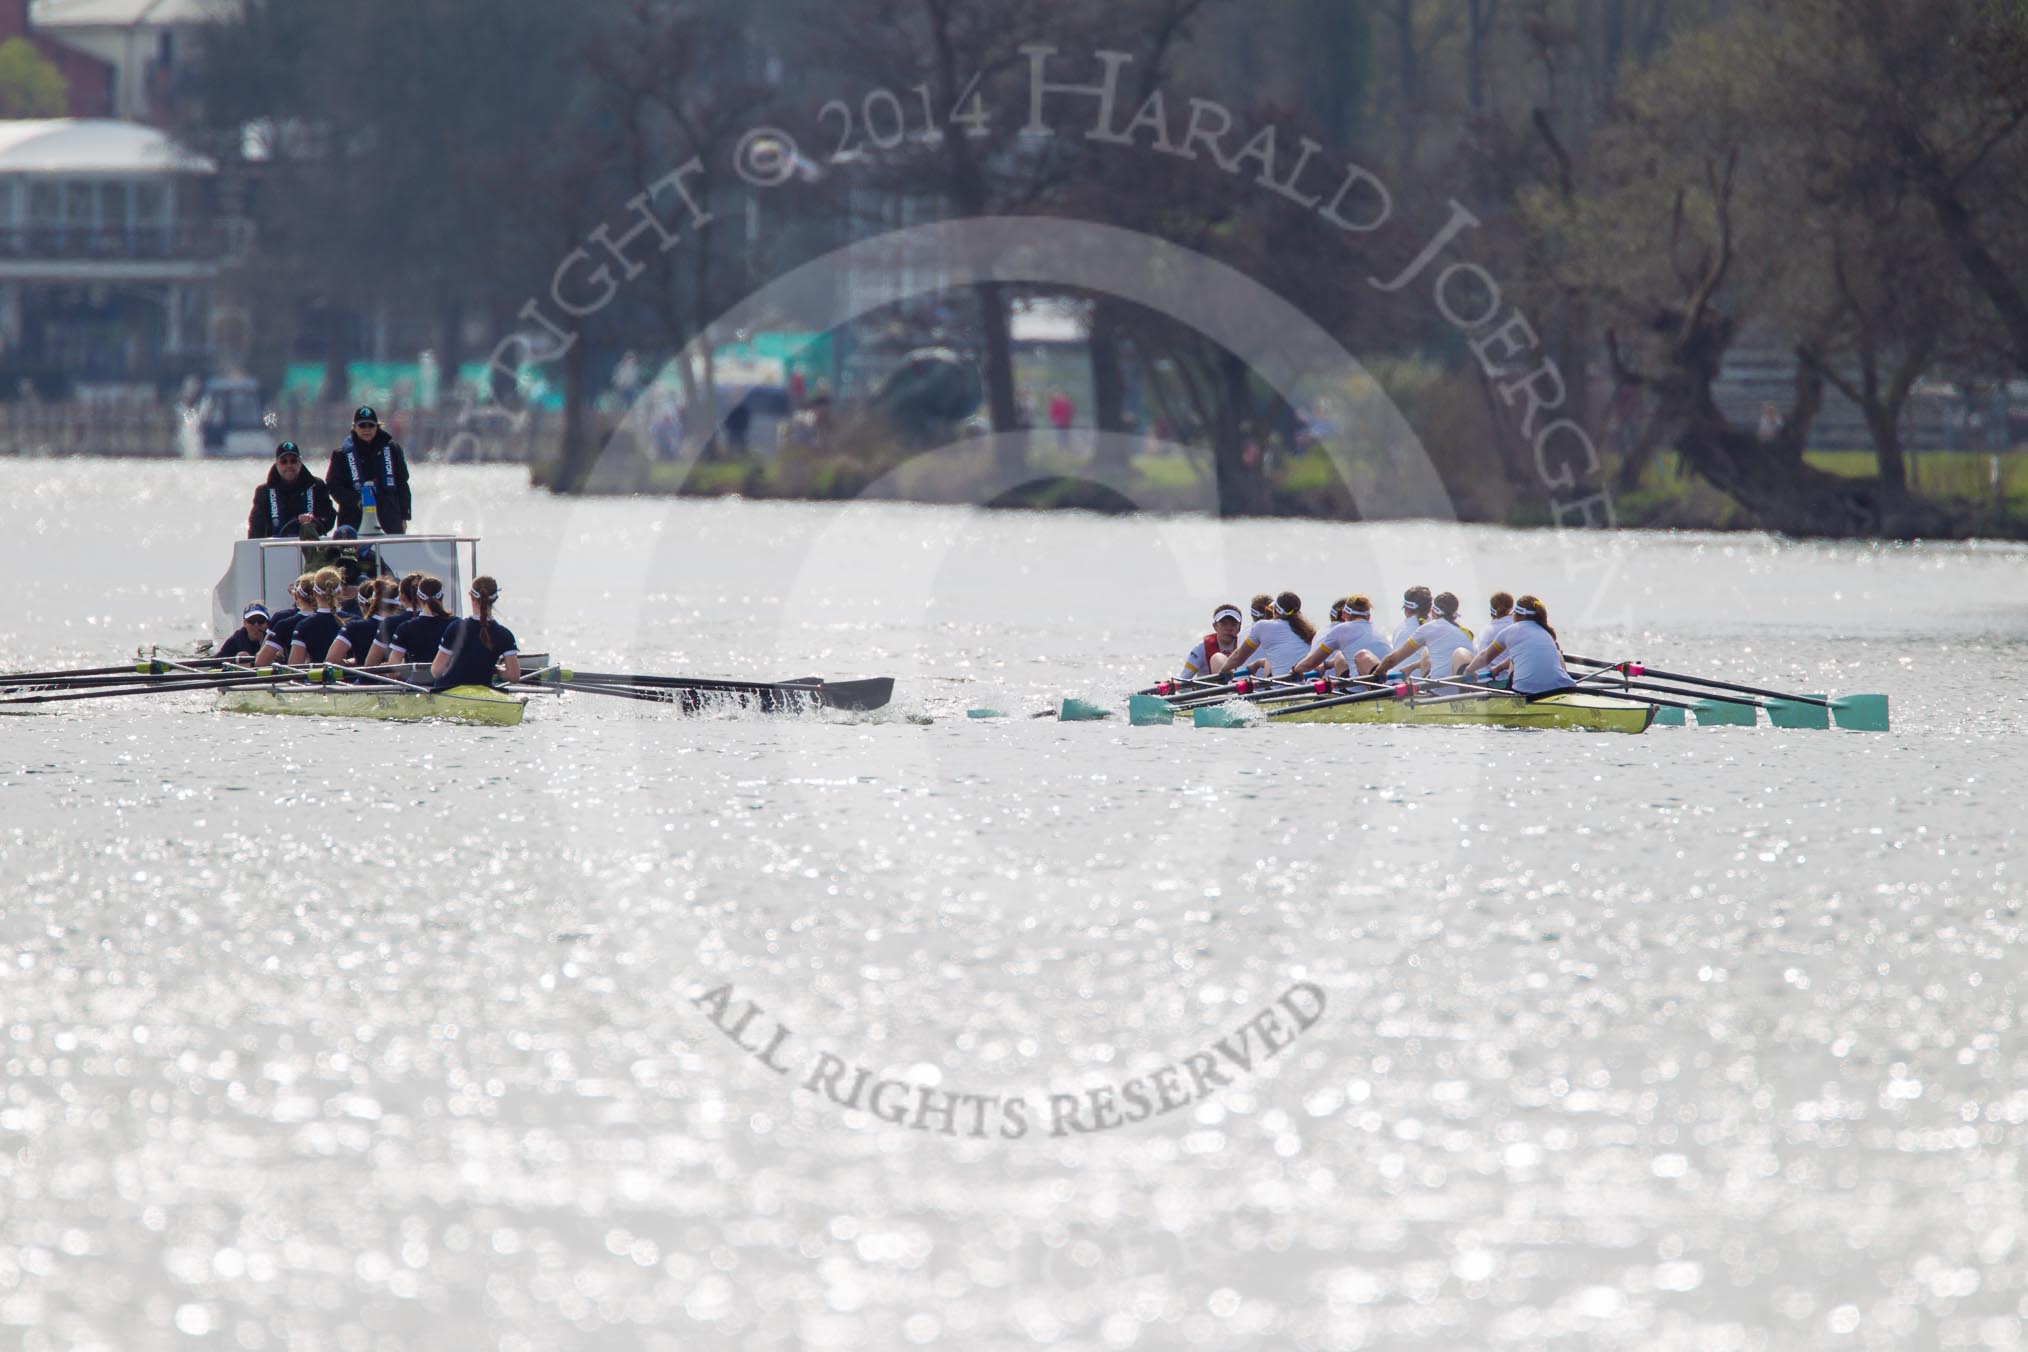 The Women's Boat Race and Henley Boat Races 2014: The Women's Reserves - Osiris v. Blondie race. Osiris (Oxford) on the left,  and Blondie (Cambridge) are still quite close together..
River Thames,
Henley-on-Thames,
Buckinghamshire,
United Kingdom,
on 30 March 2014 at 14:16, image #142